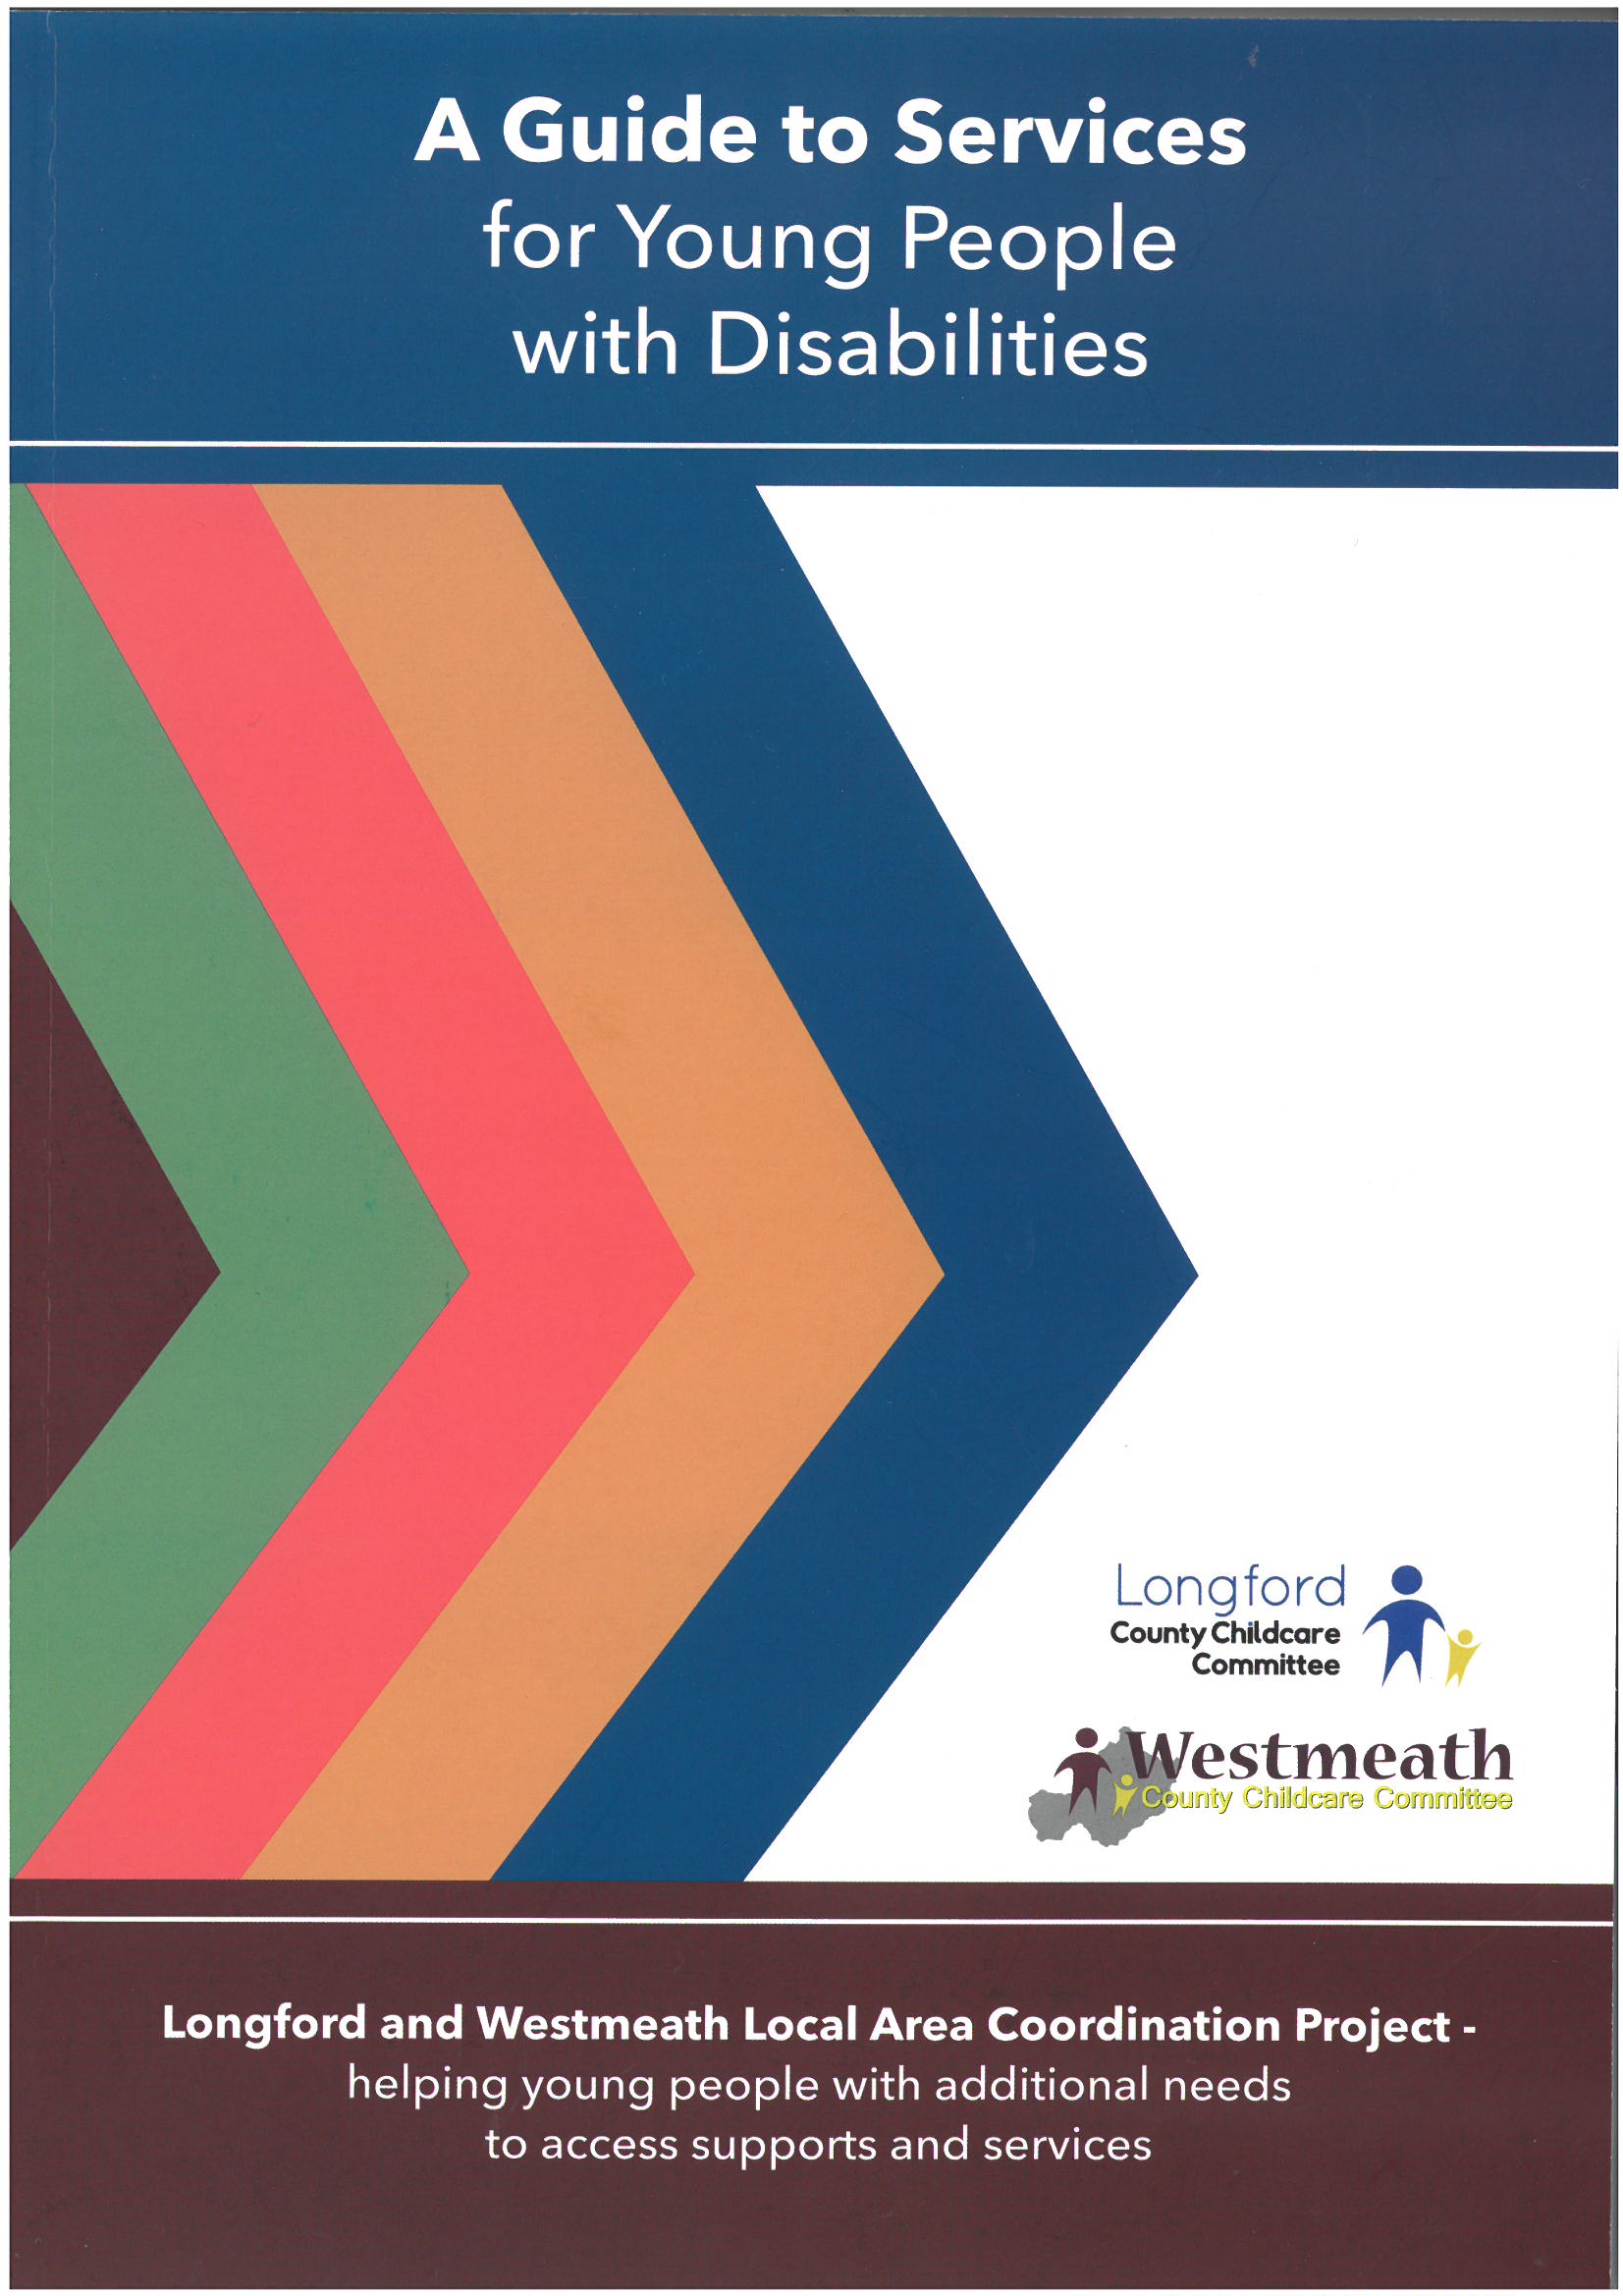 A guide to services for young people with disabilities